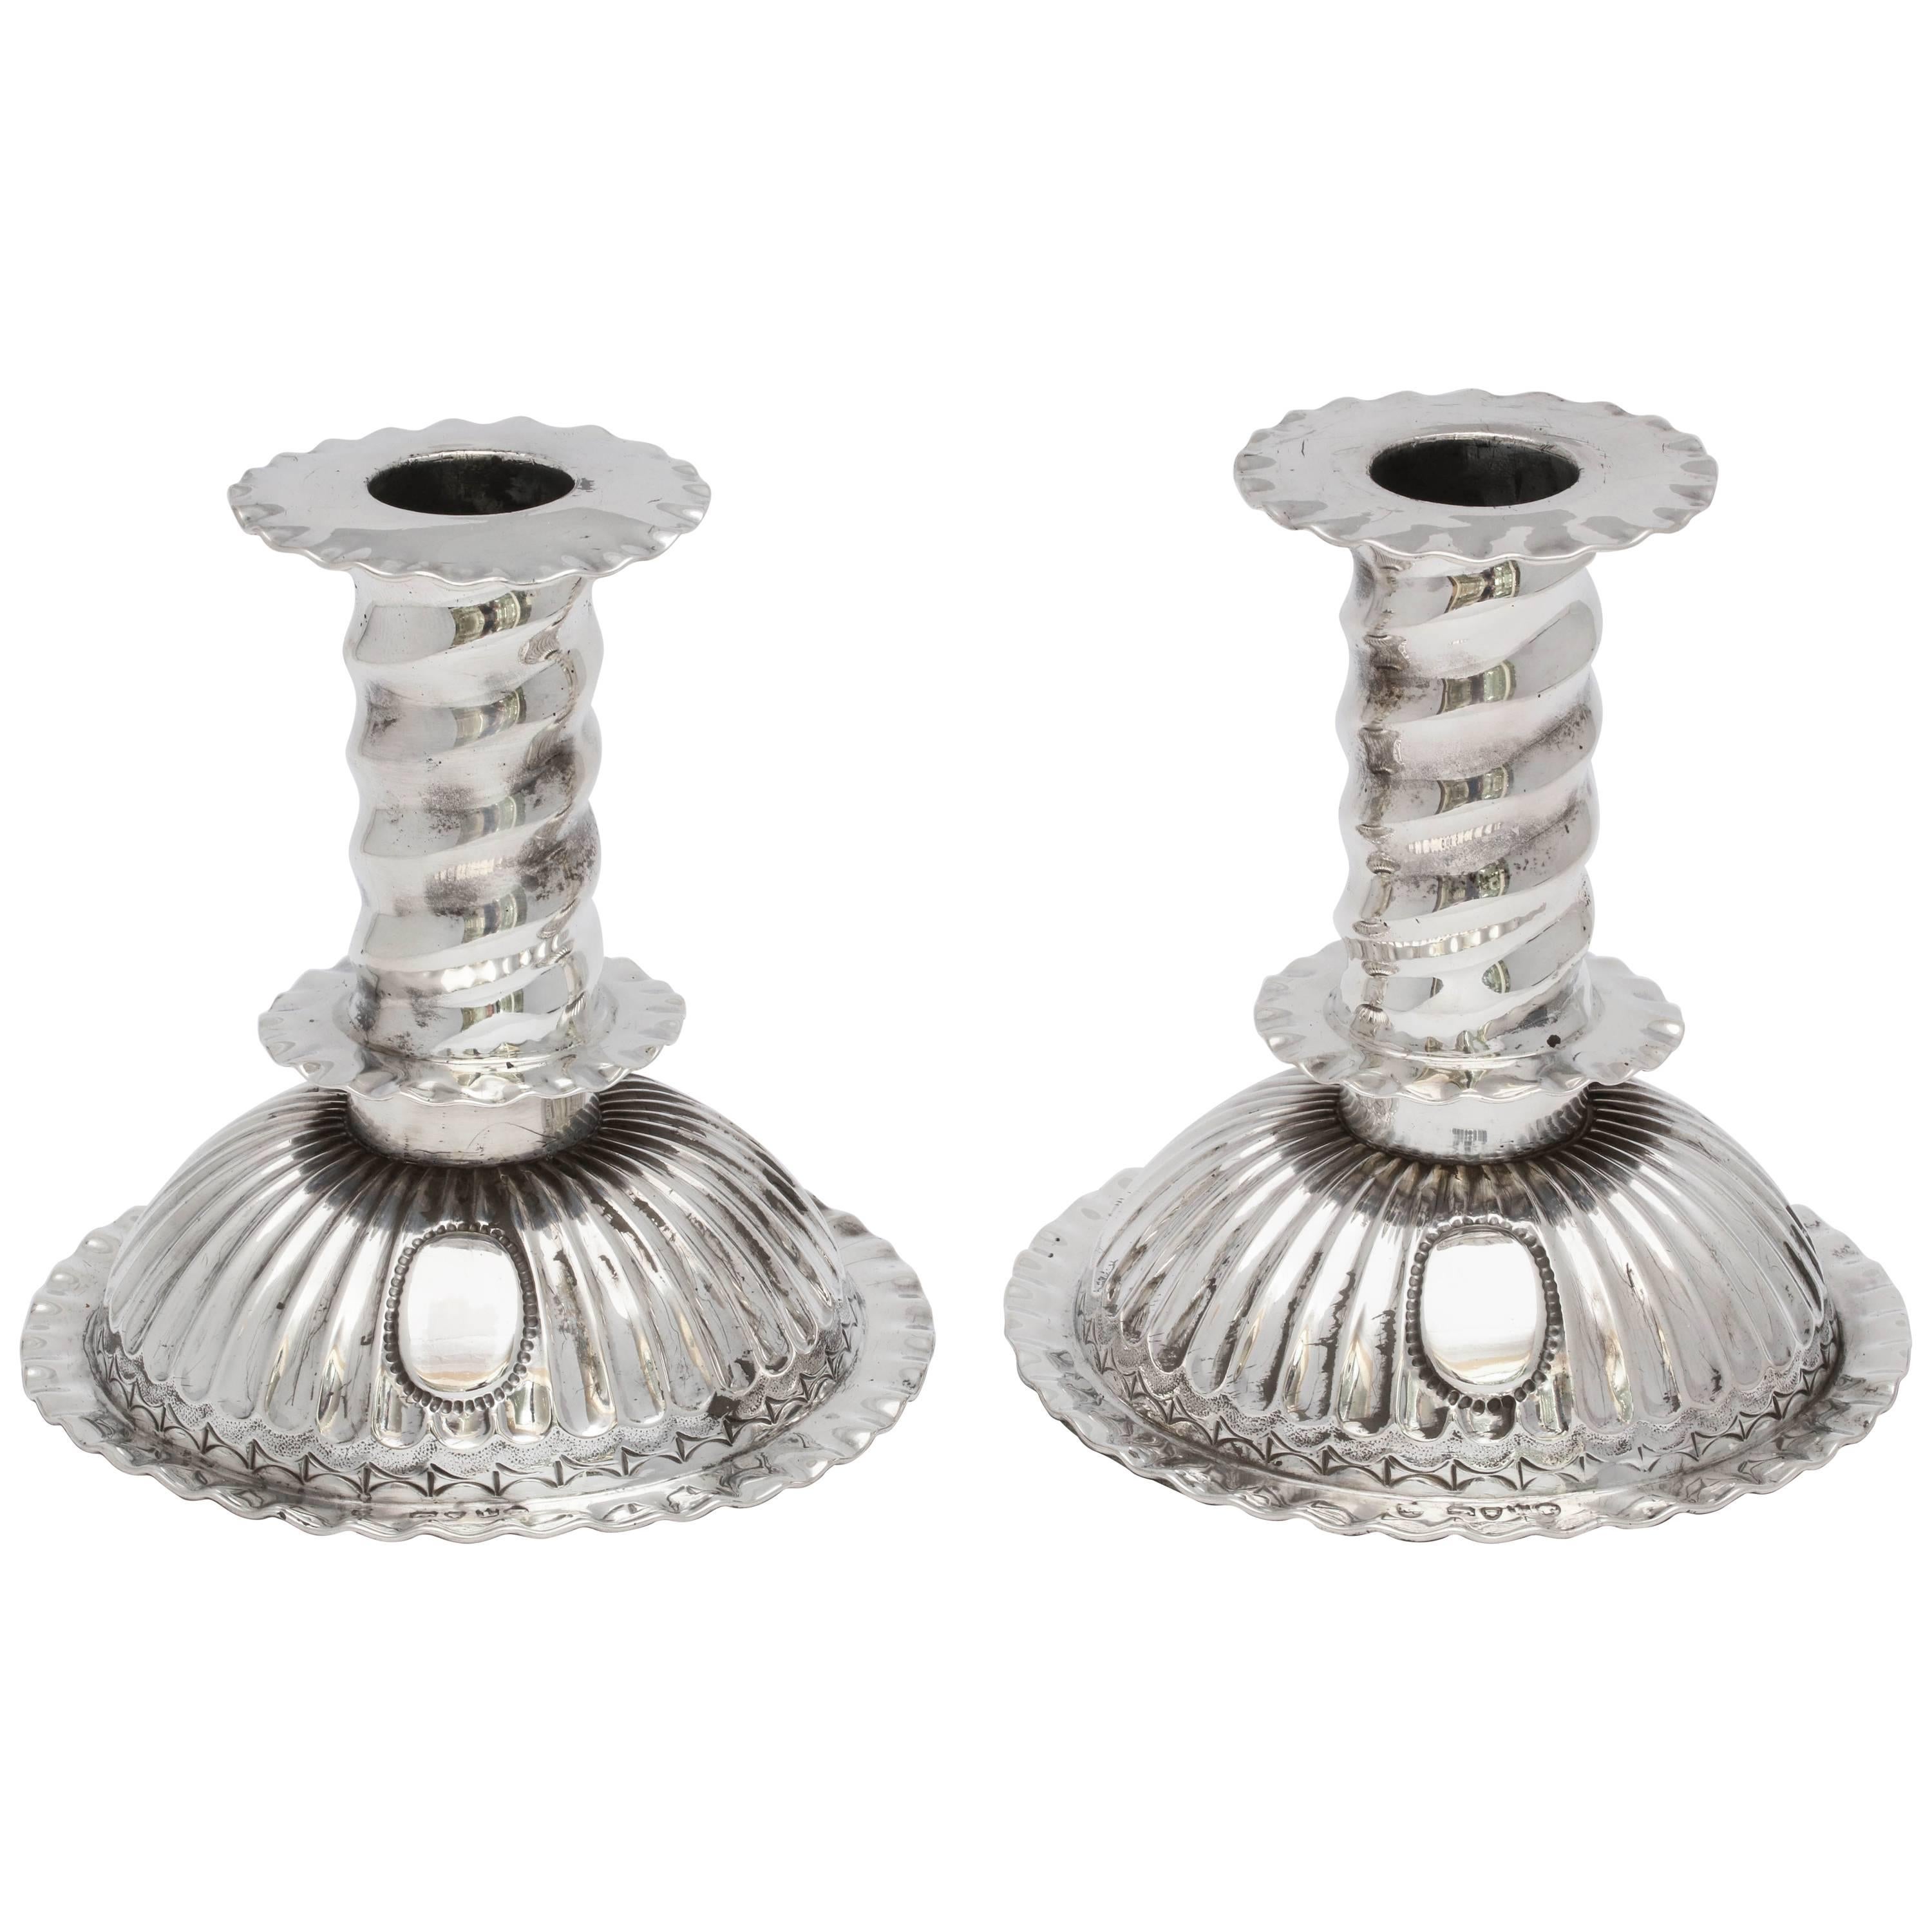 Victorian Pair of Sterling Silver Capstan Candlesticks in the 16th Century Style